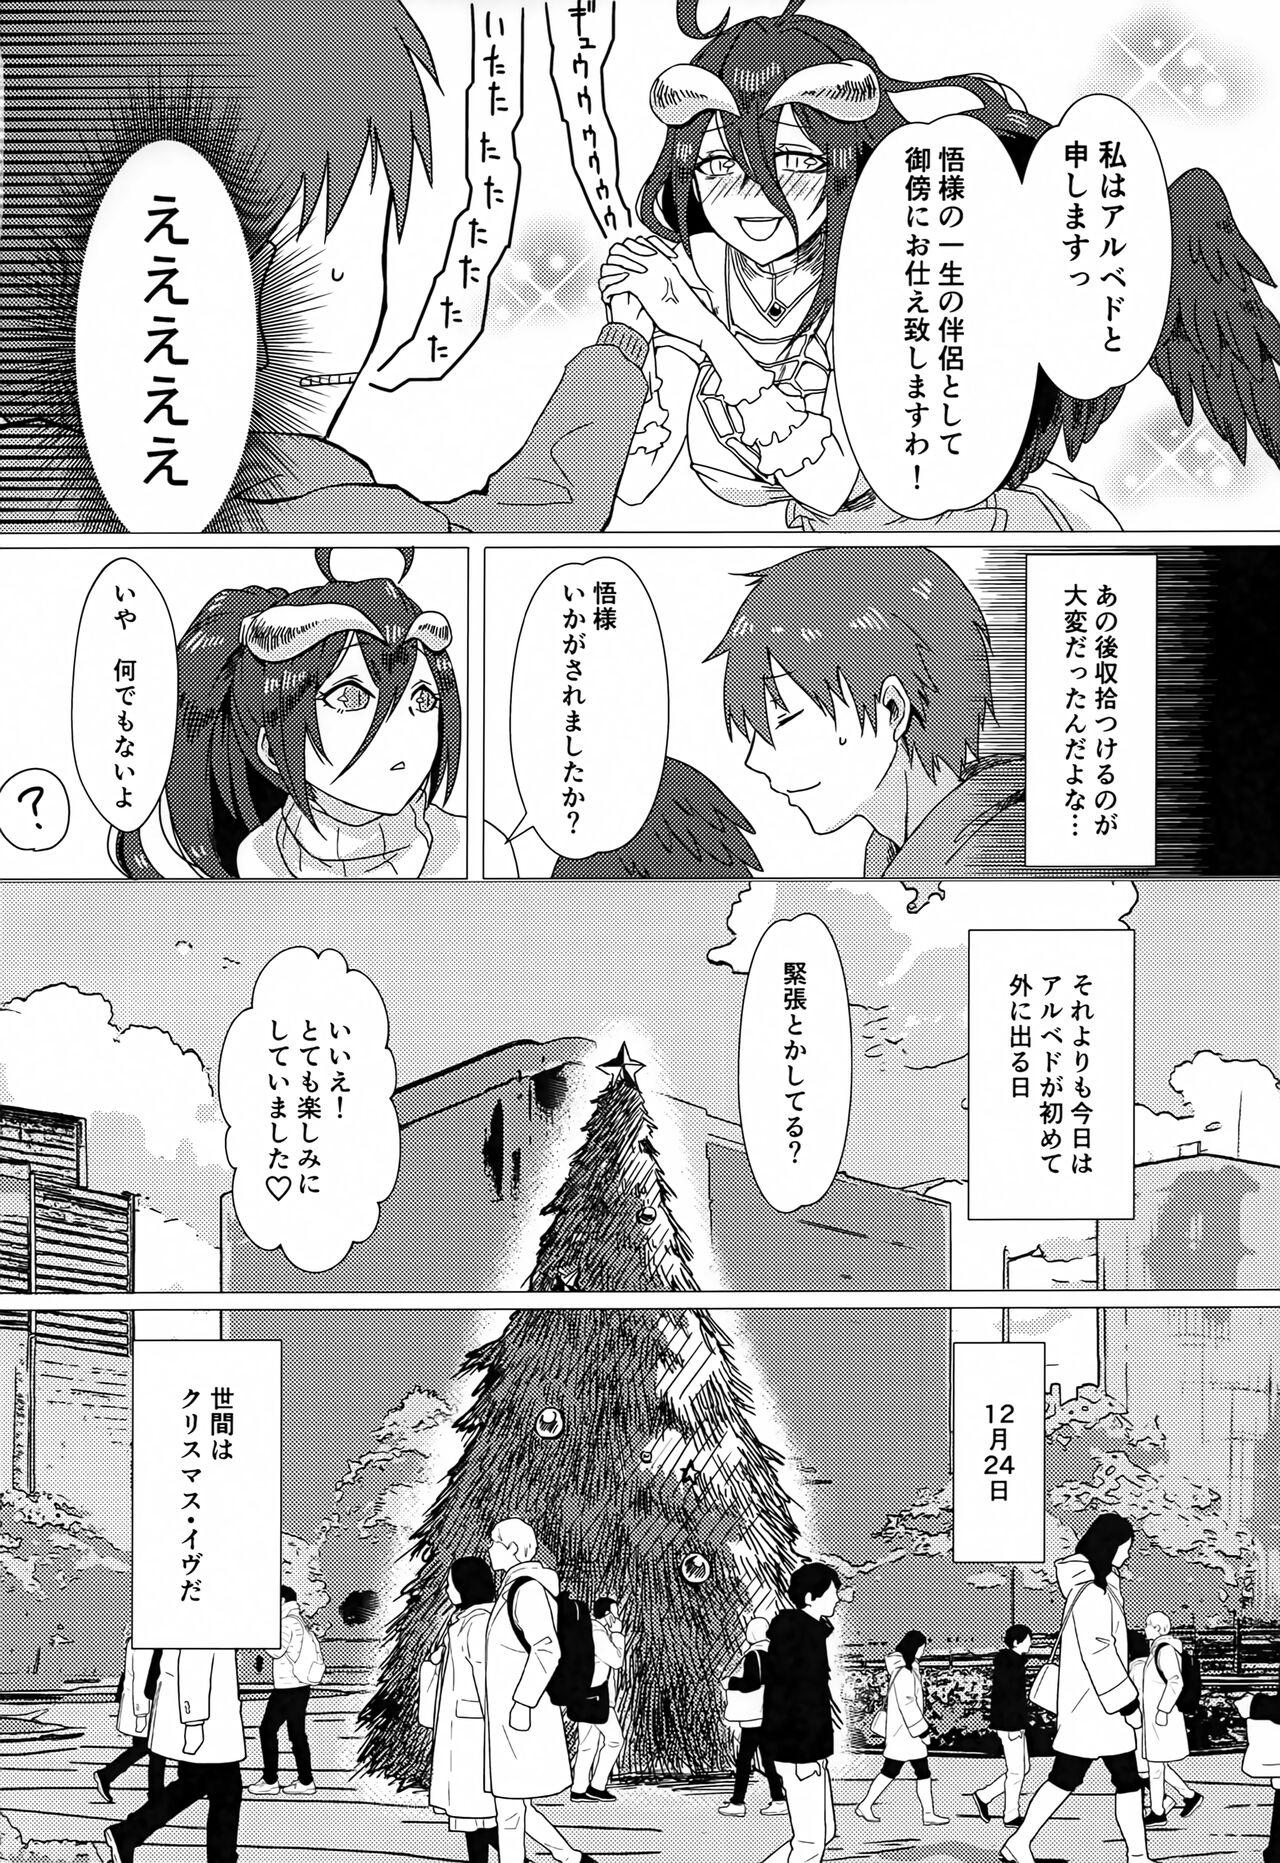 Strap On Albedo-san to! 2 - Overlord Long Hair - Page 5